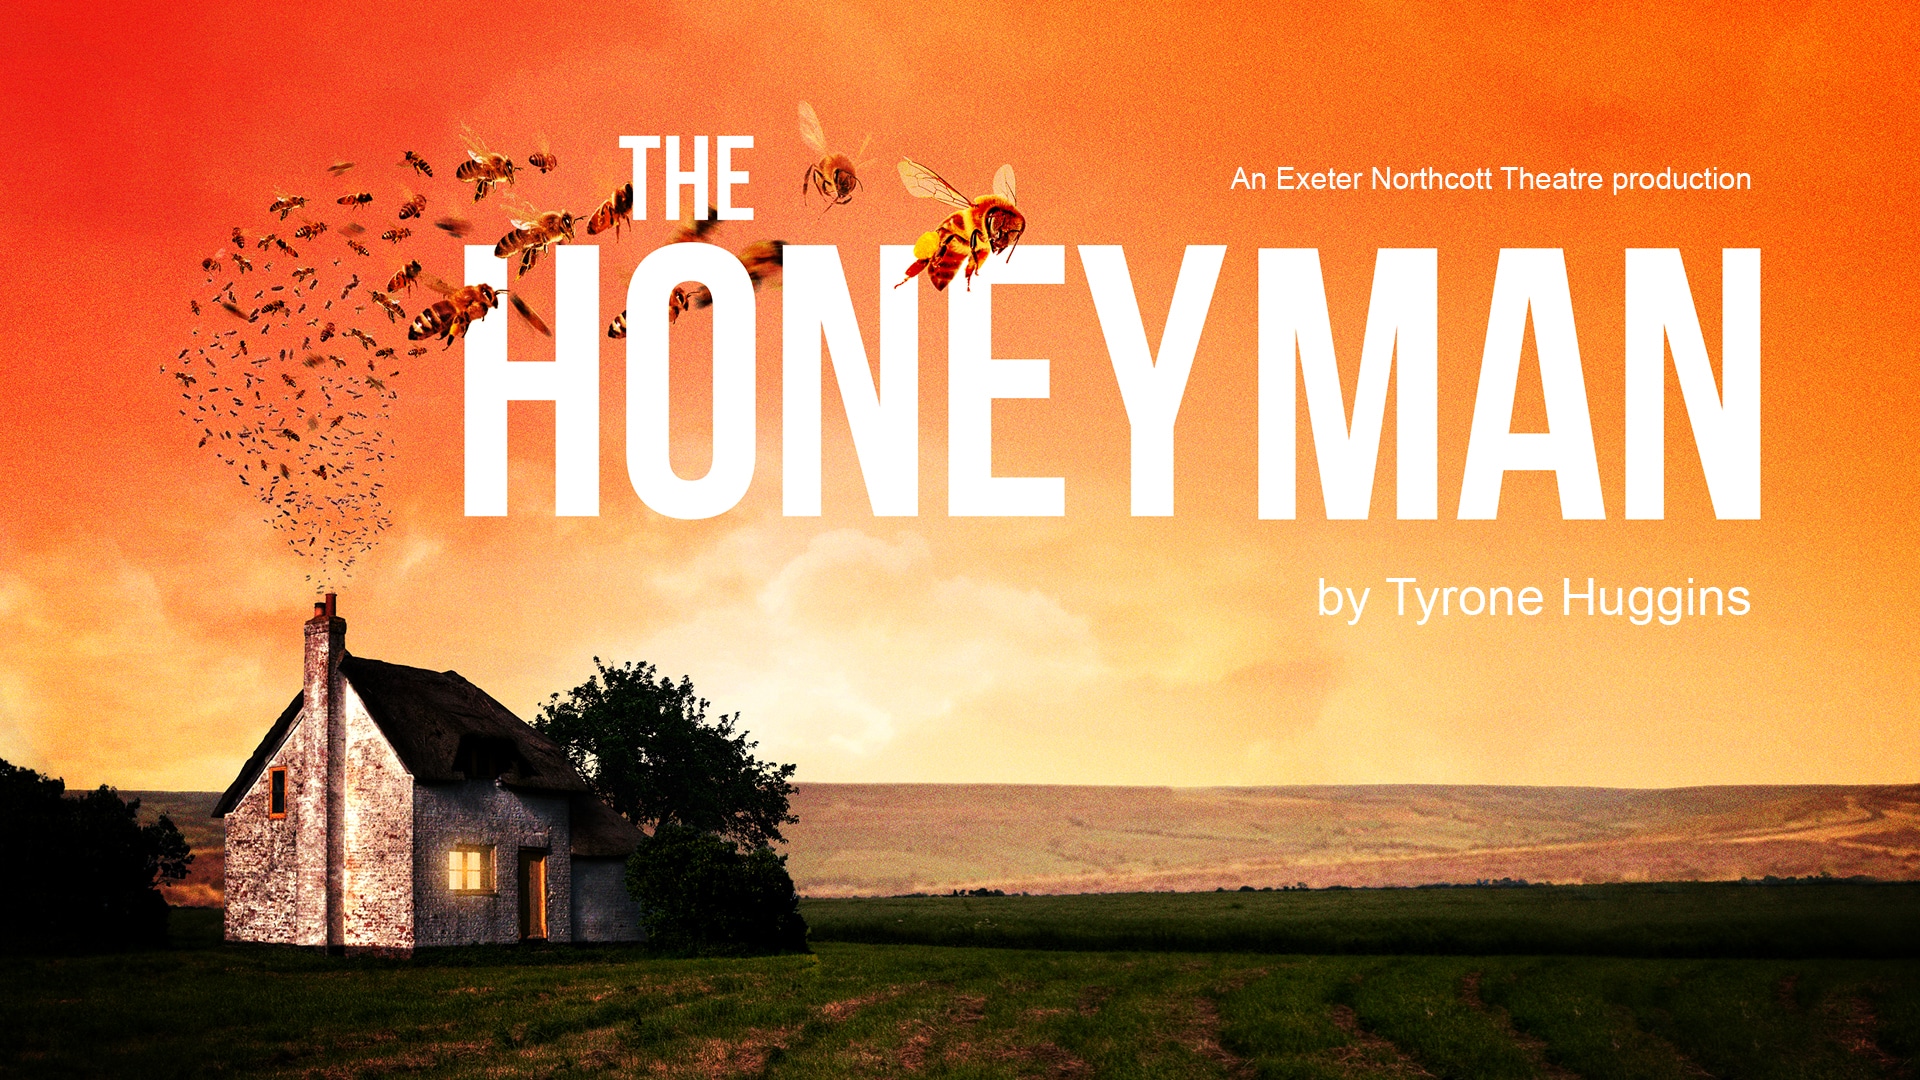 The Honey Man promotional image - a swarm of bees flies out of the chimney of a lonely cottage against a bright orange background